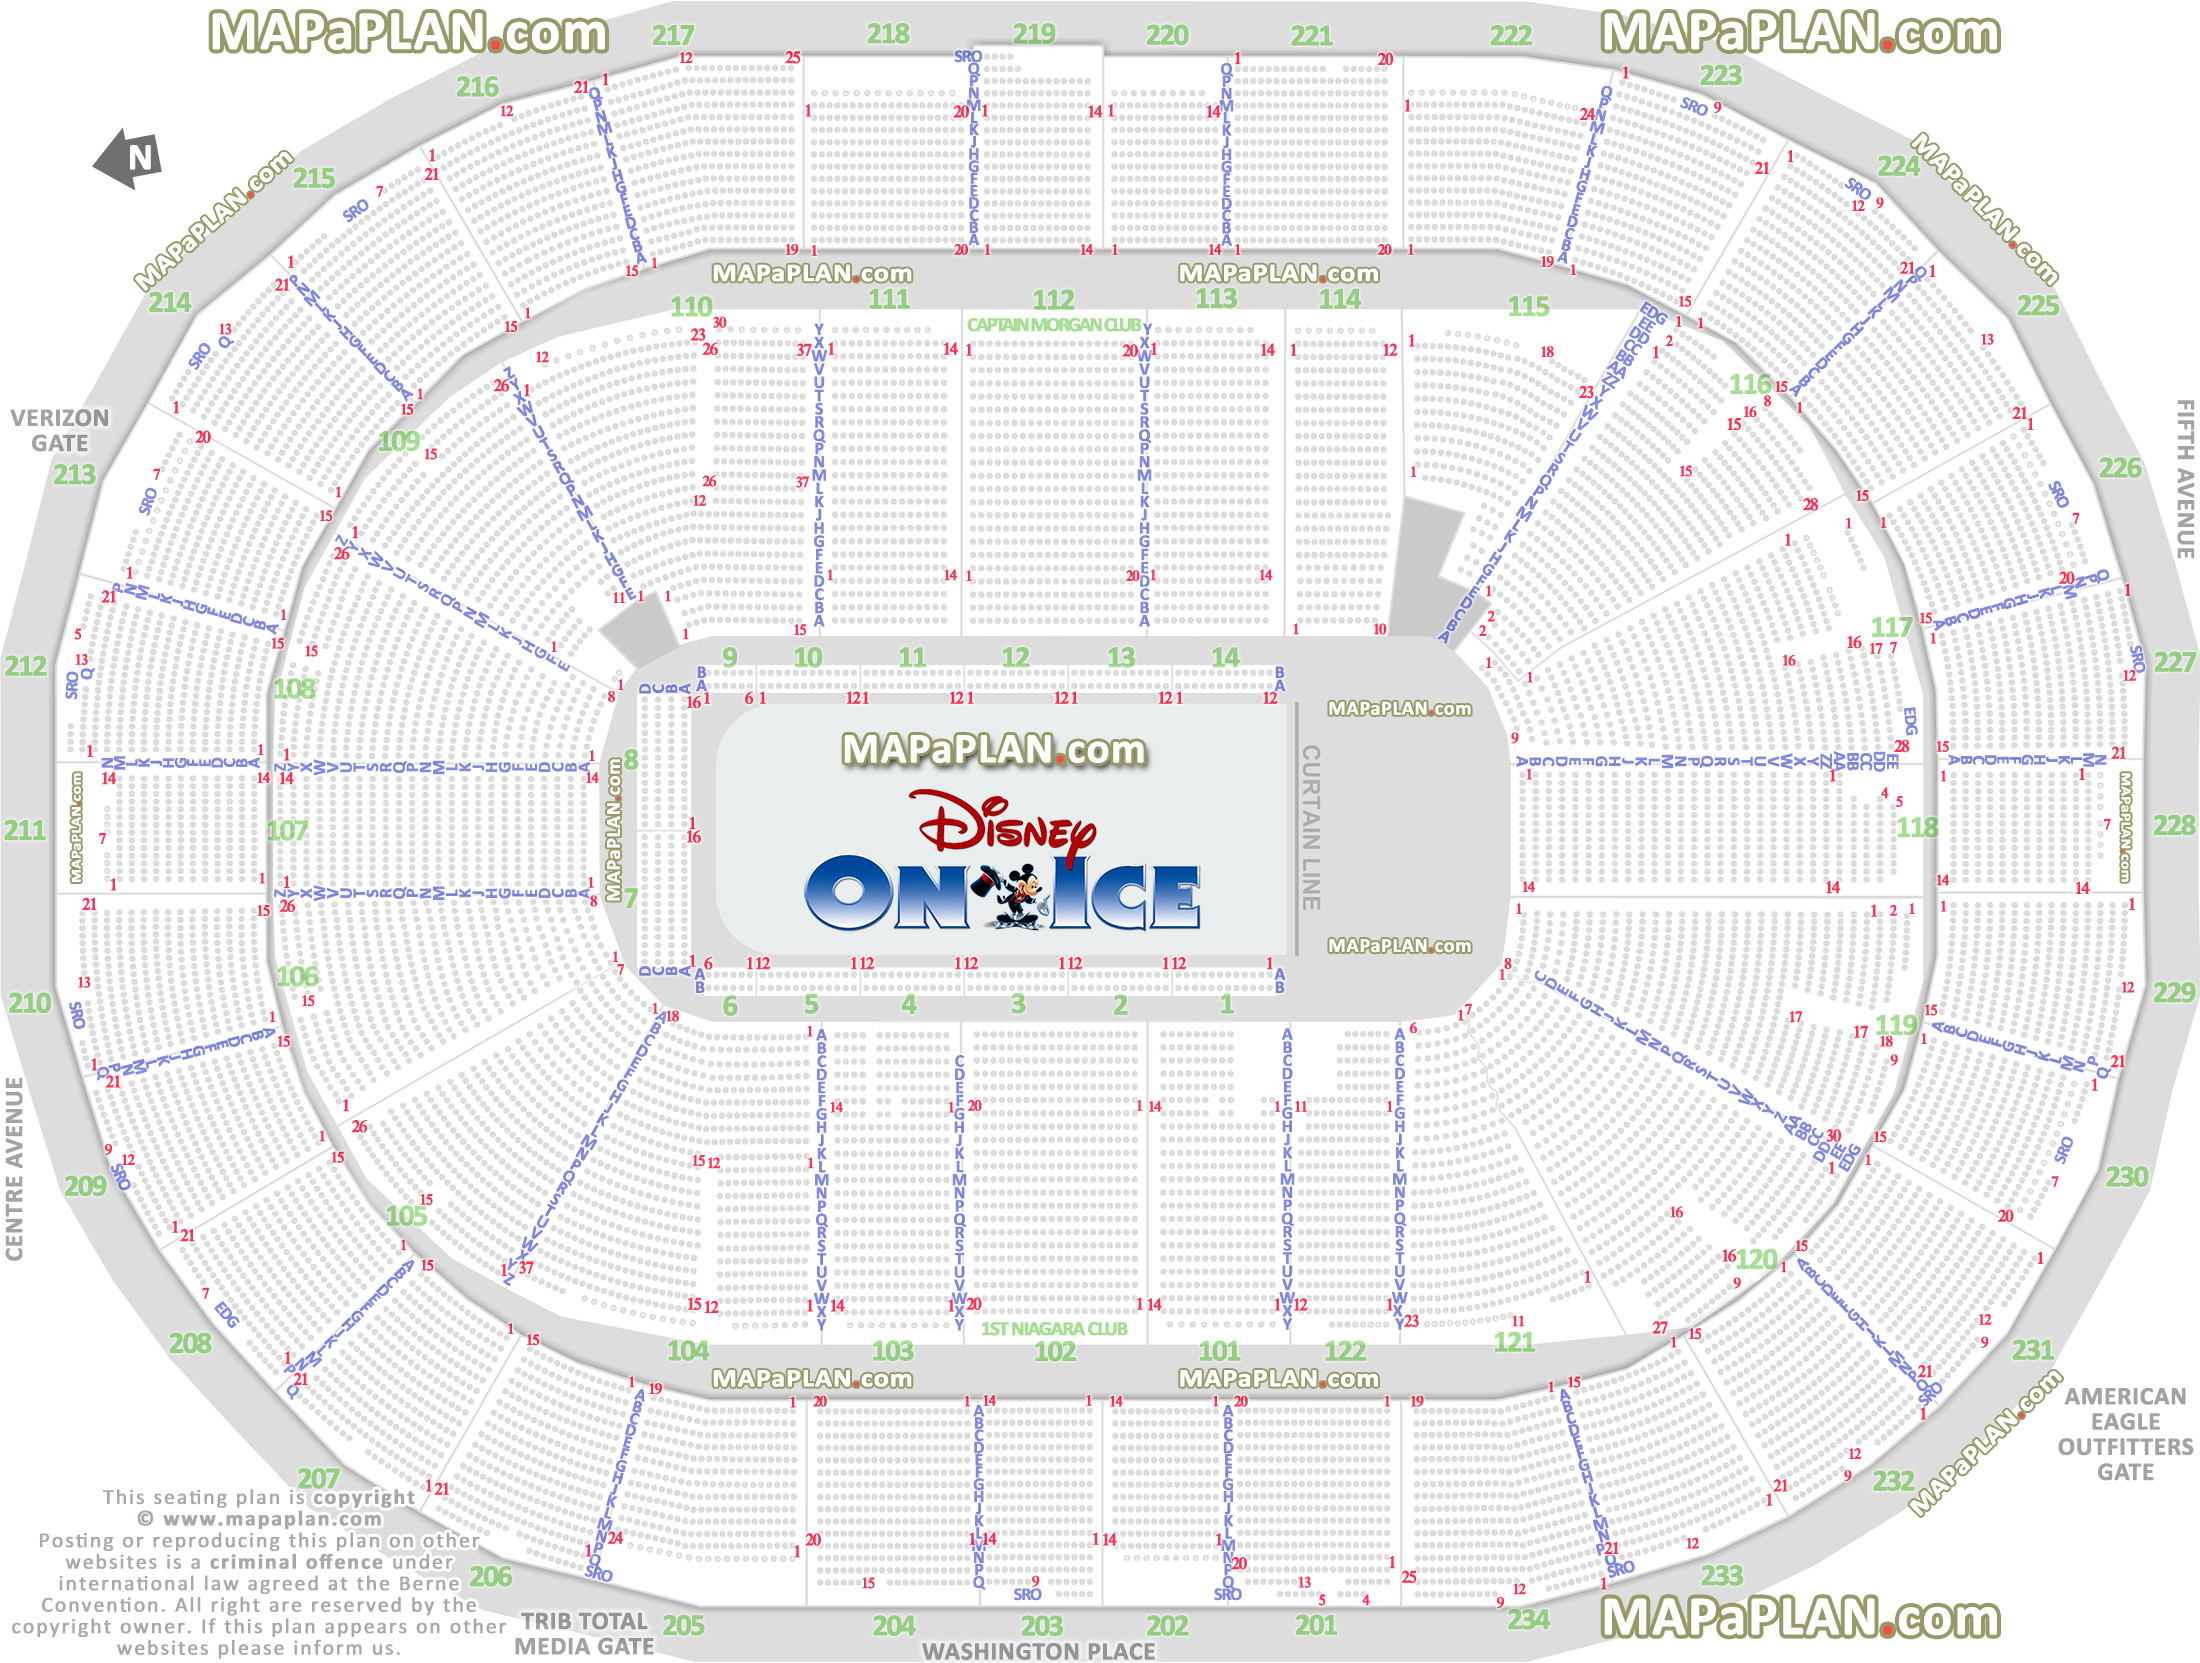 disney ice show seating arrangement review diagram best partial obstructed vip lounge view seat finder precise aisle numbering rear view location data Pittsburgh PPG Paints Arena seating chart